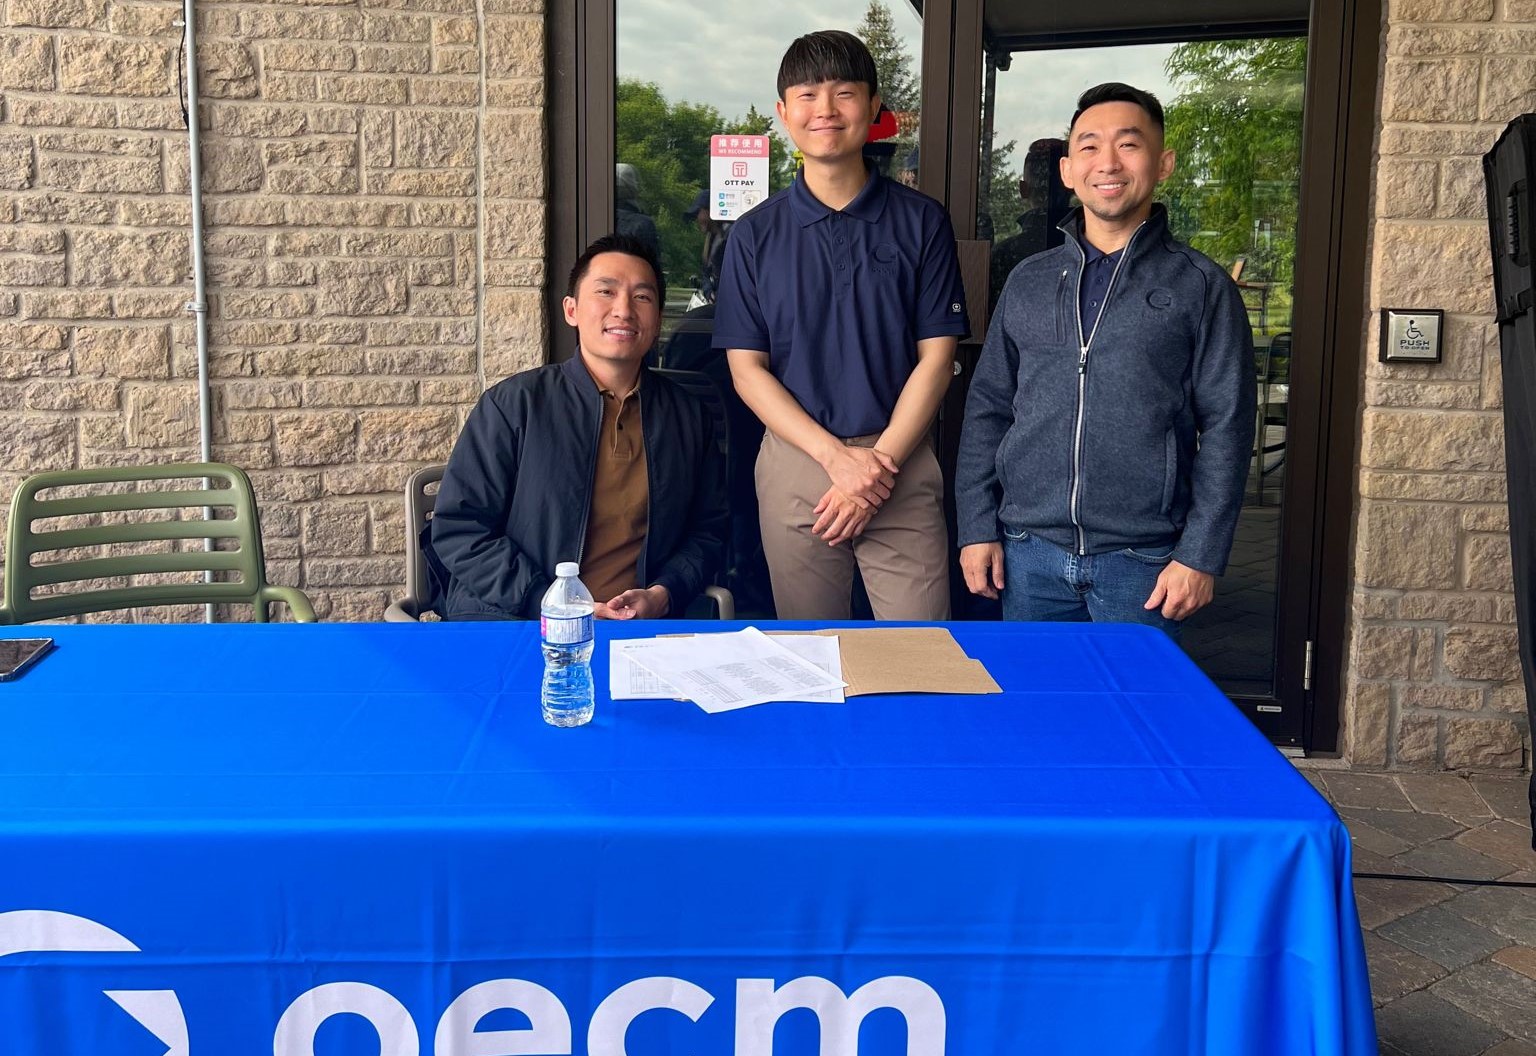 From Left, Curtis Diep, Justin Sin, and John See are waiting to register golfers at the registration table.